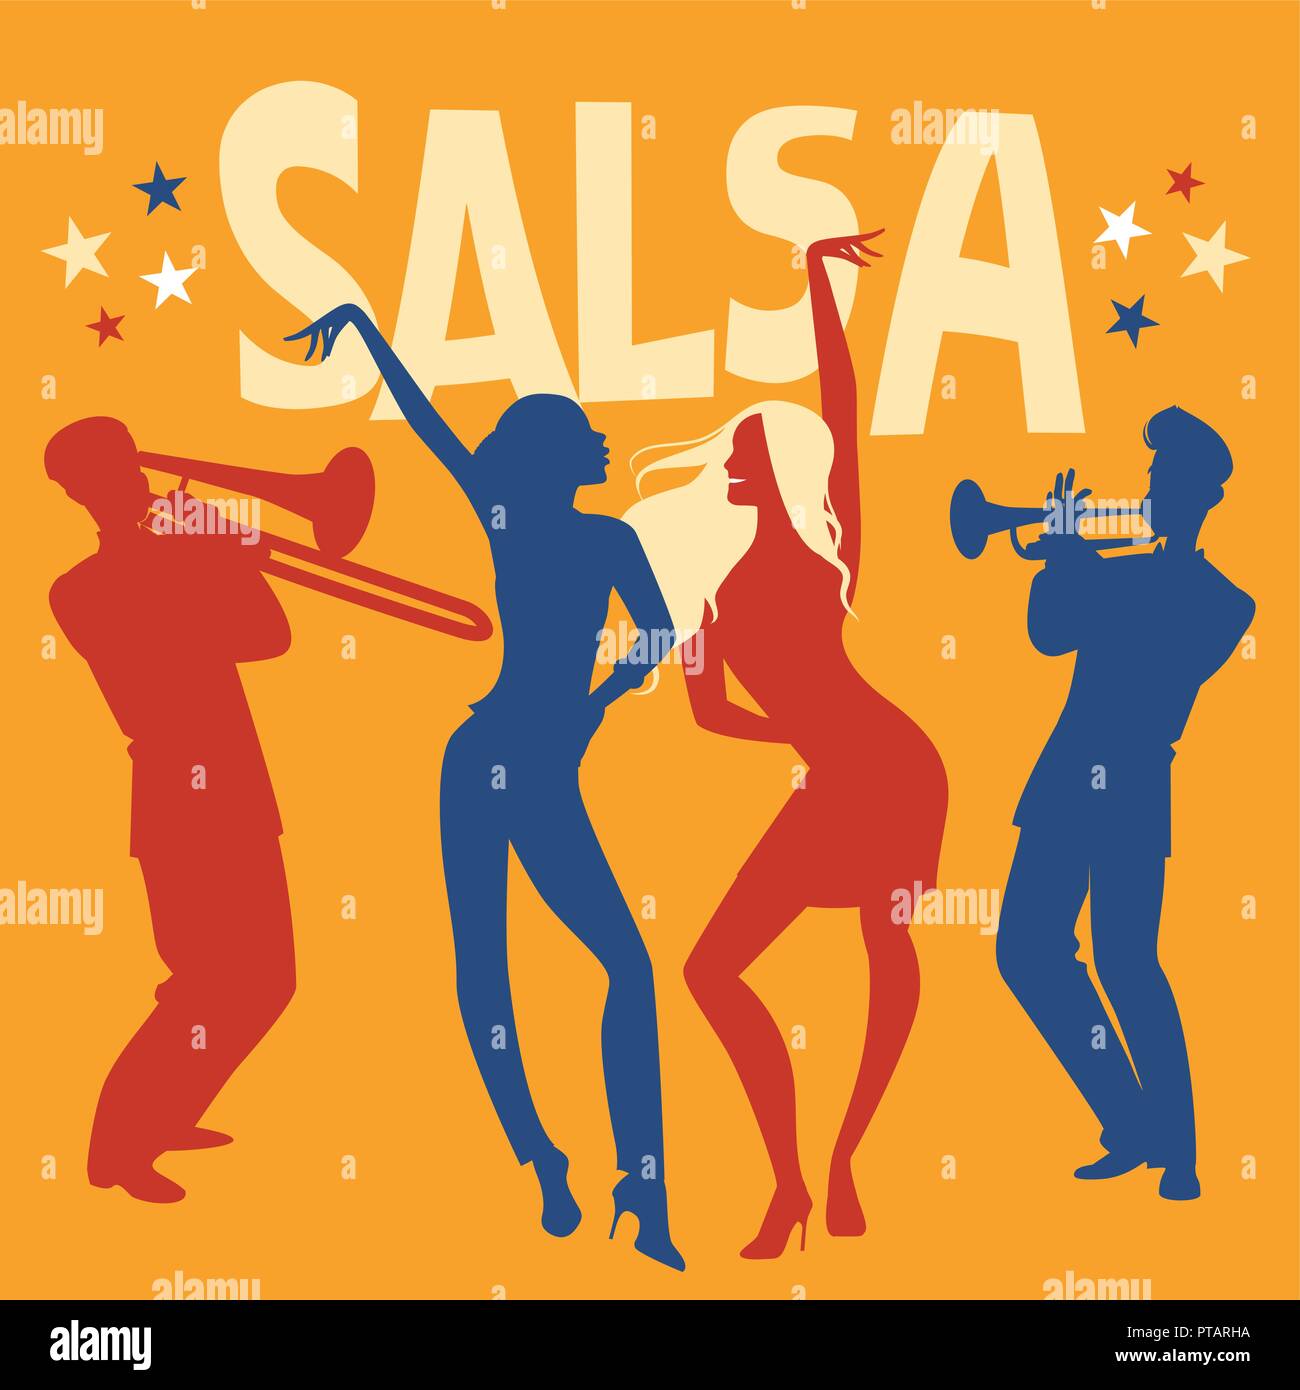 Silhouettes of two girls dancing salsa. Trumpeter and trombonist in the background. Stock Vector